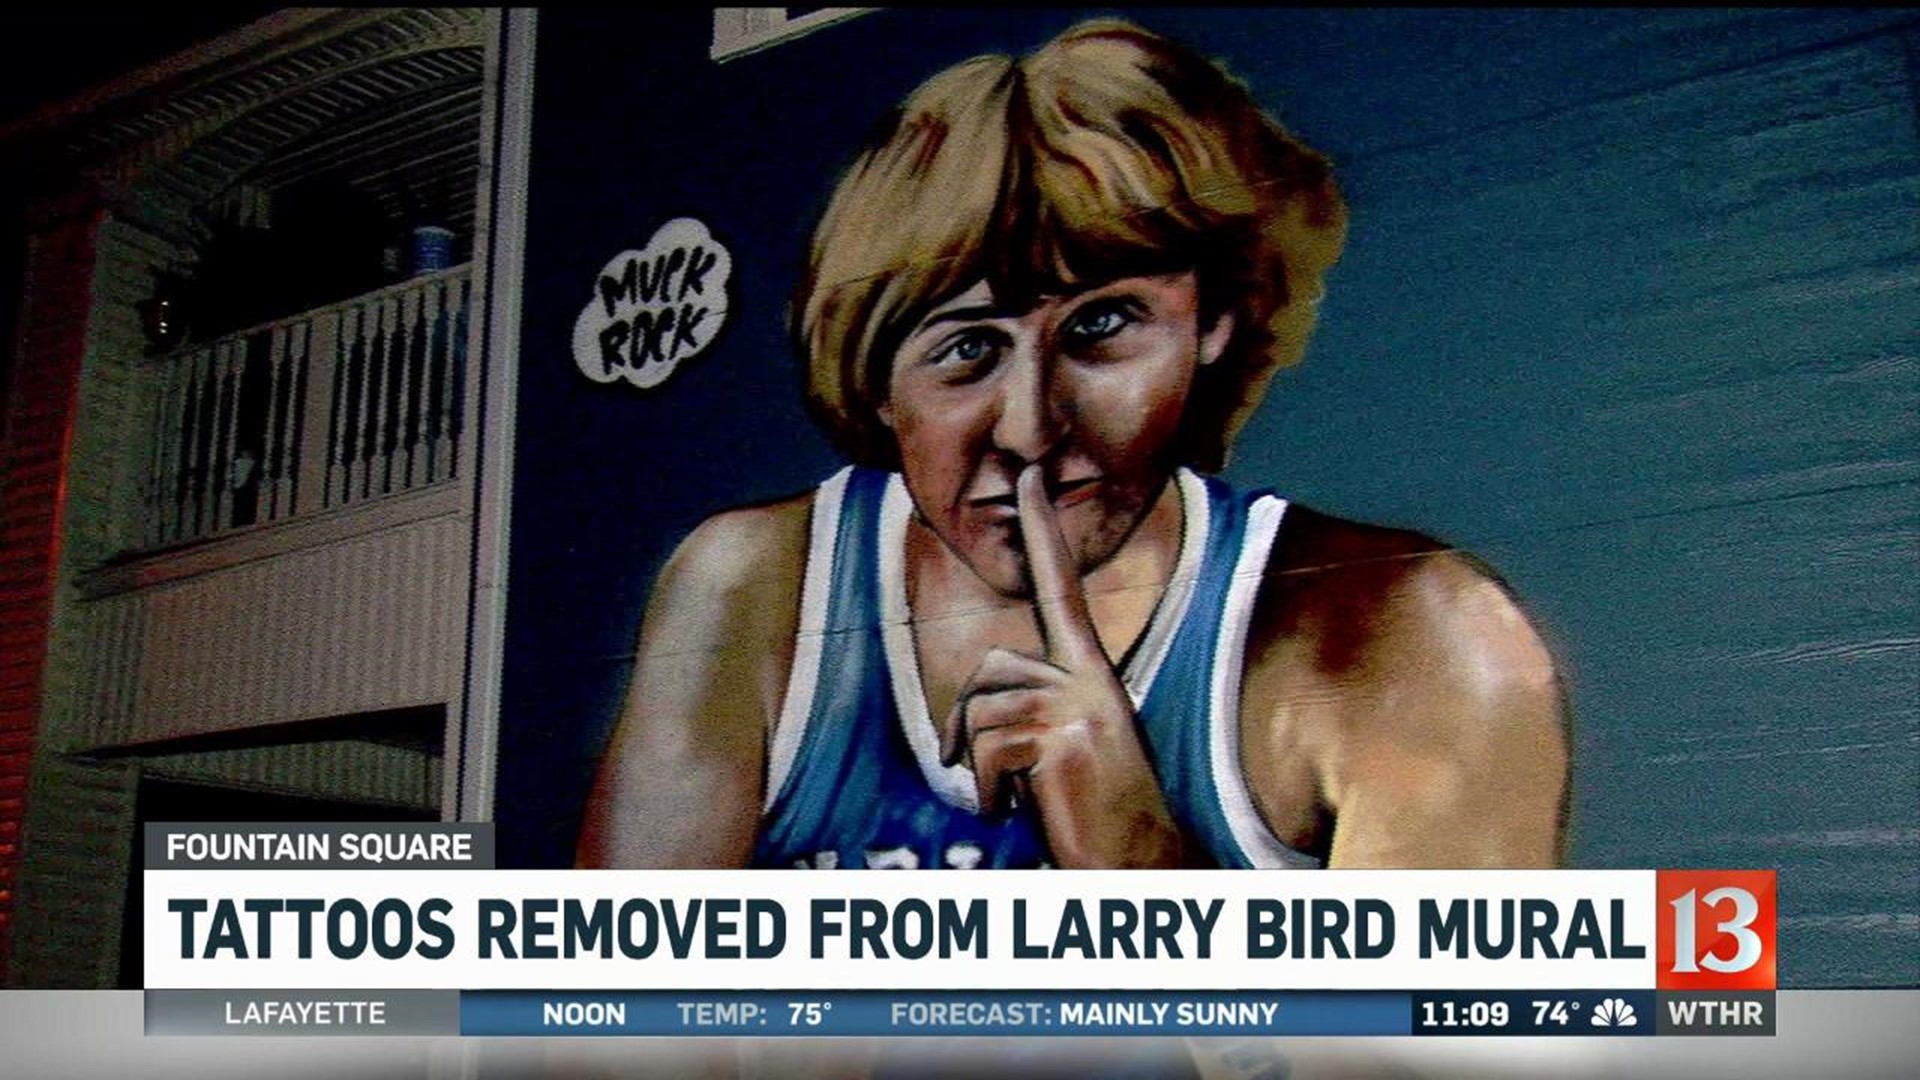 Tattoos Removed from Larry Bird Mural